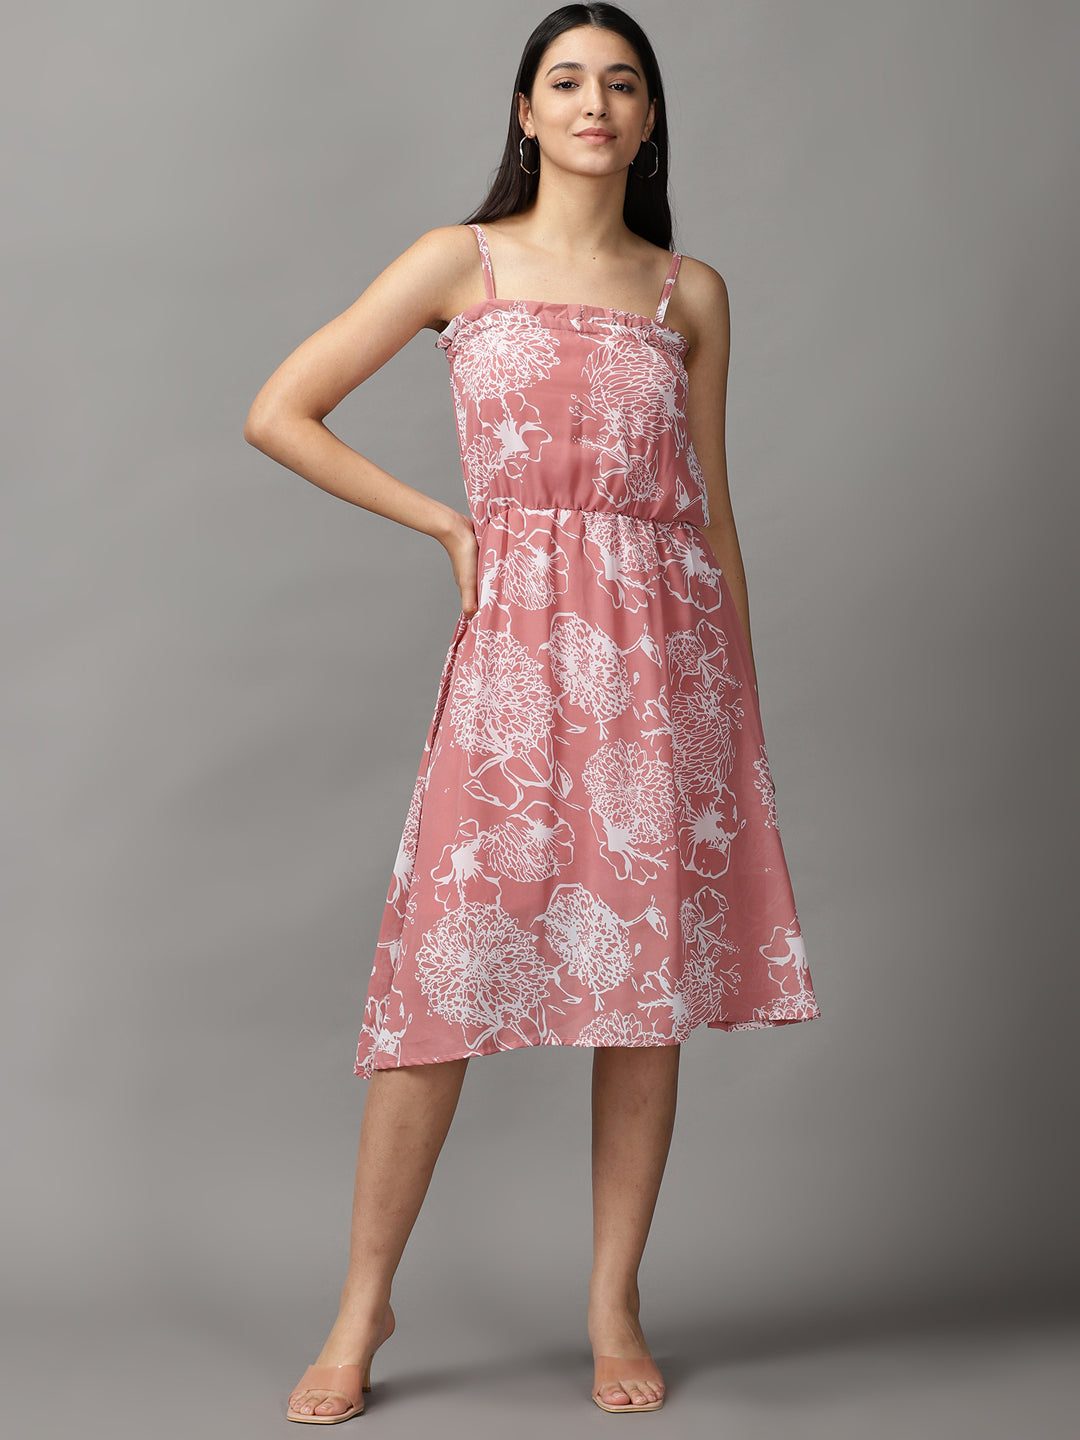 Women's Mauve Floral Fit and Flare Dress